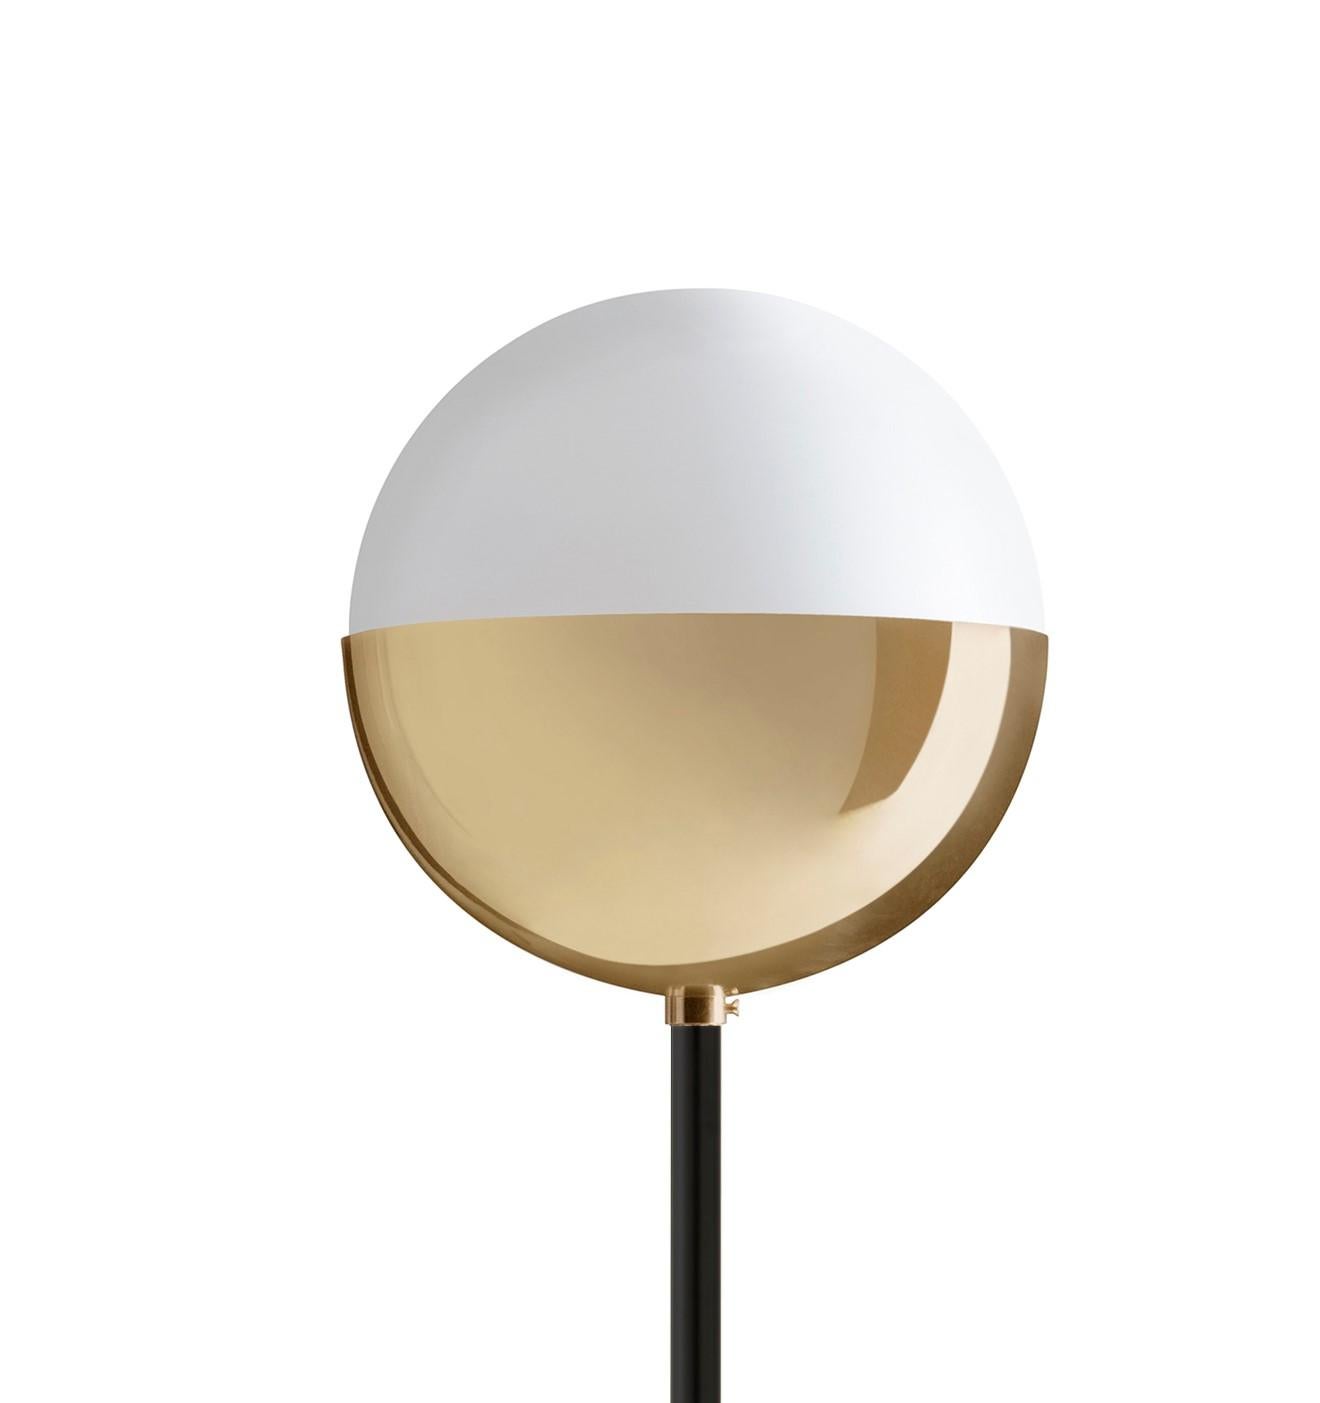 Floor lamp 01 dimmable 160 by Magic Circus Editions
Dimensions: D 25 x H 160 cm
Materials: Carrara marble base, smooth brass tube, glossy mouth blown glass
Non-Dimmable version available.


Rethinking, reimagining, redesigning familiar objects